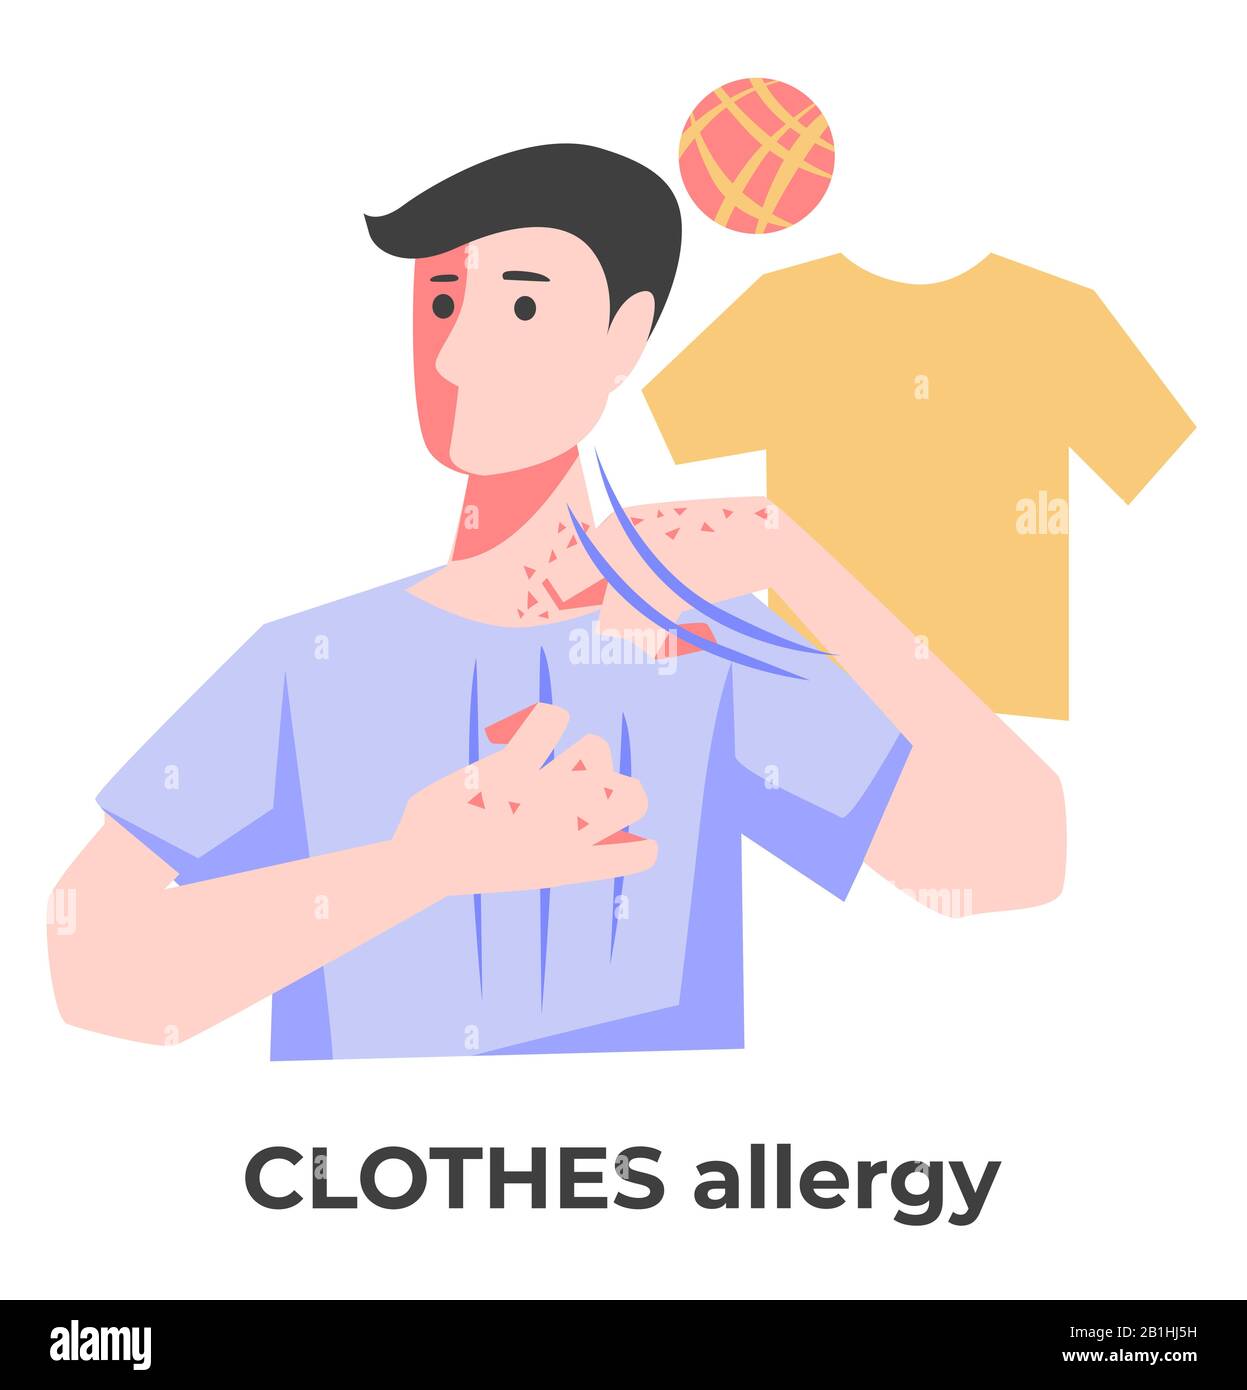 Dermatitis or clothes allergy, man itching skin rash Stock Vector